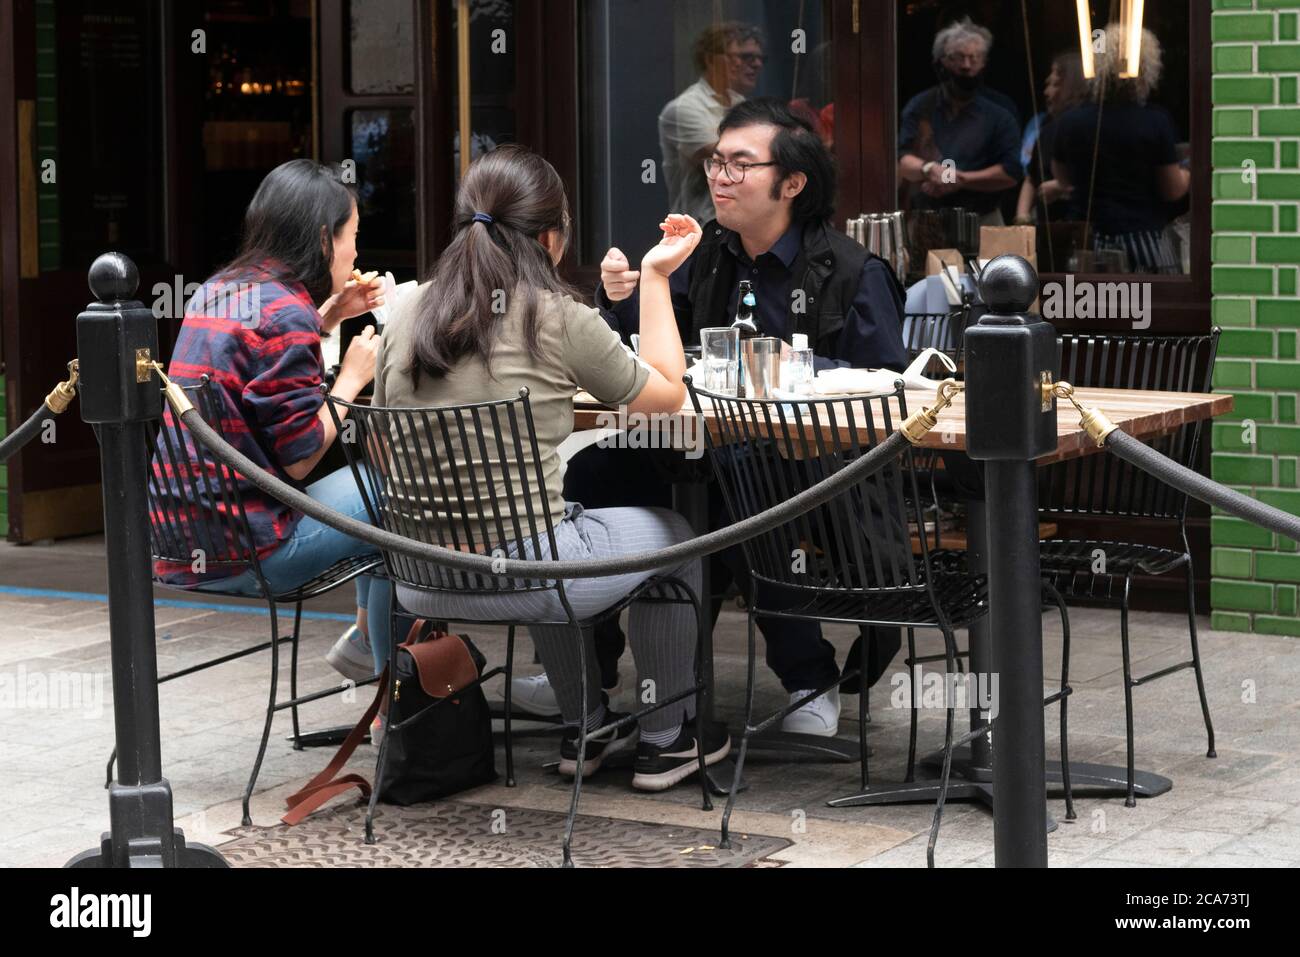 Diners eat food at outdoor restaurant tables in Kingly Street during the Eat Out to Help Out scheme offering diners a discount off meals to help boost restaurants and pubs post-lockdown. Stock Photo